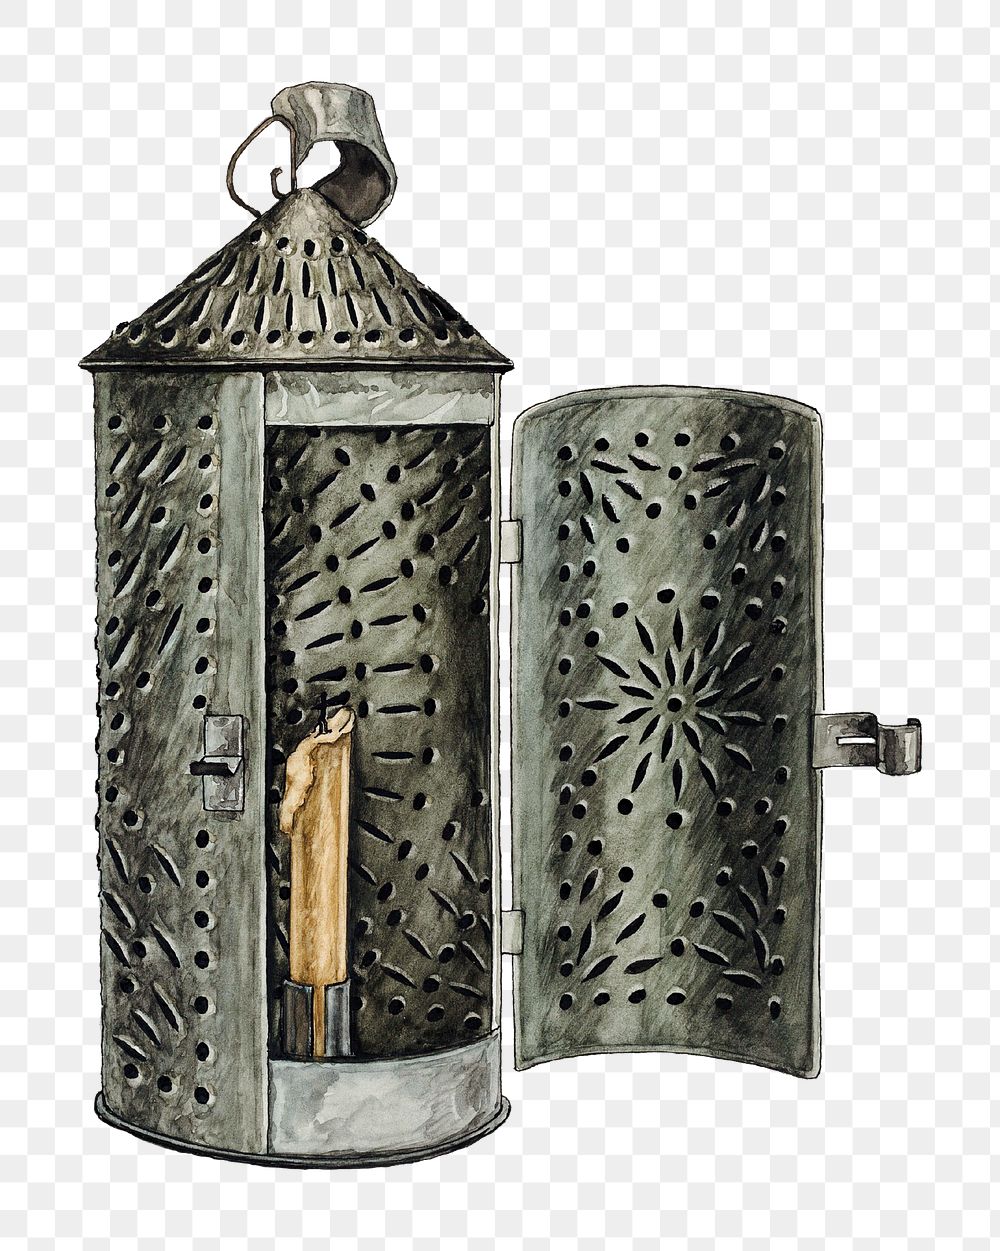 Vintage tin lantern png illustration, remixed from the artwork by Augustine Haugland